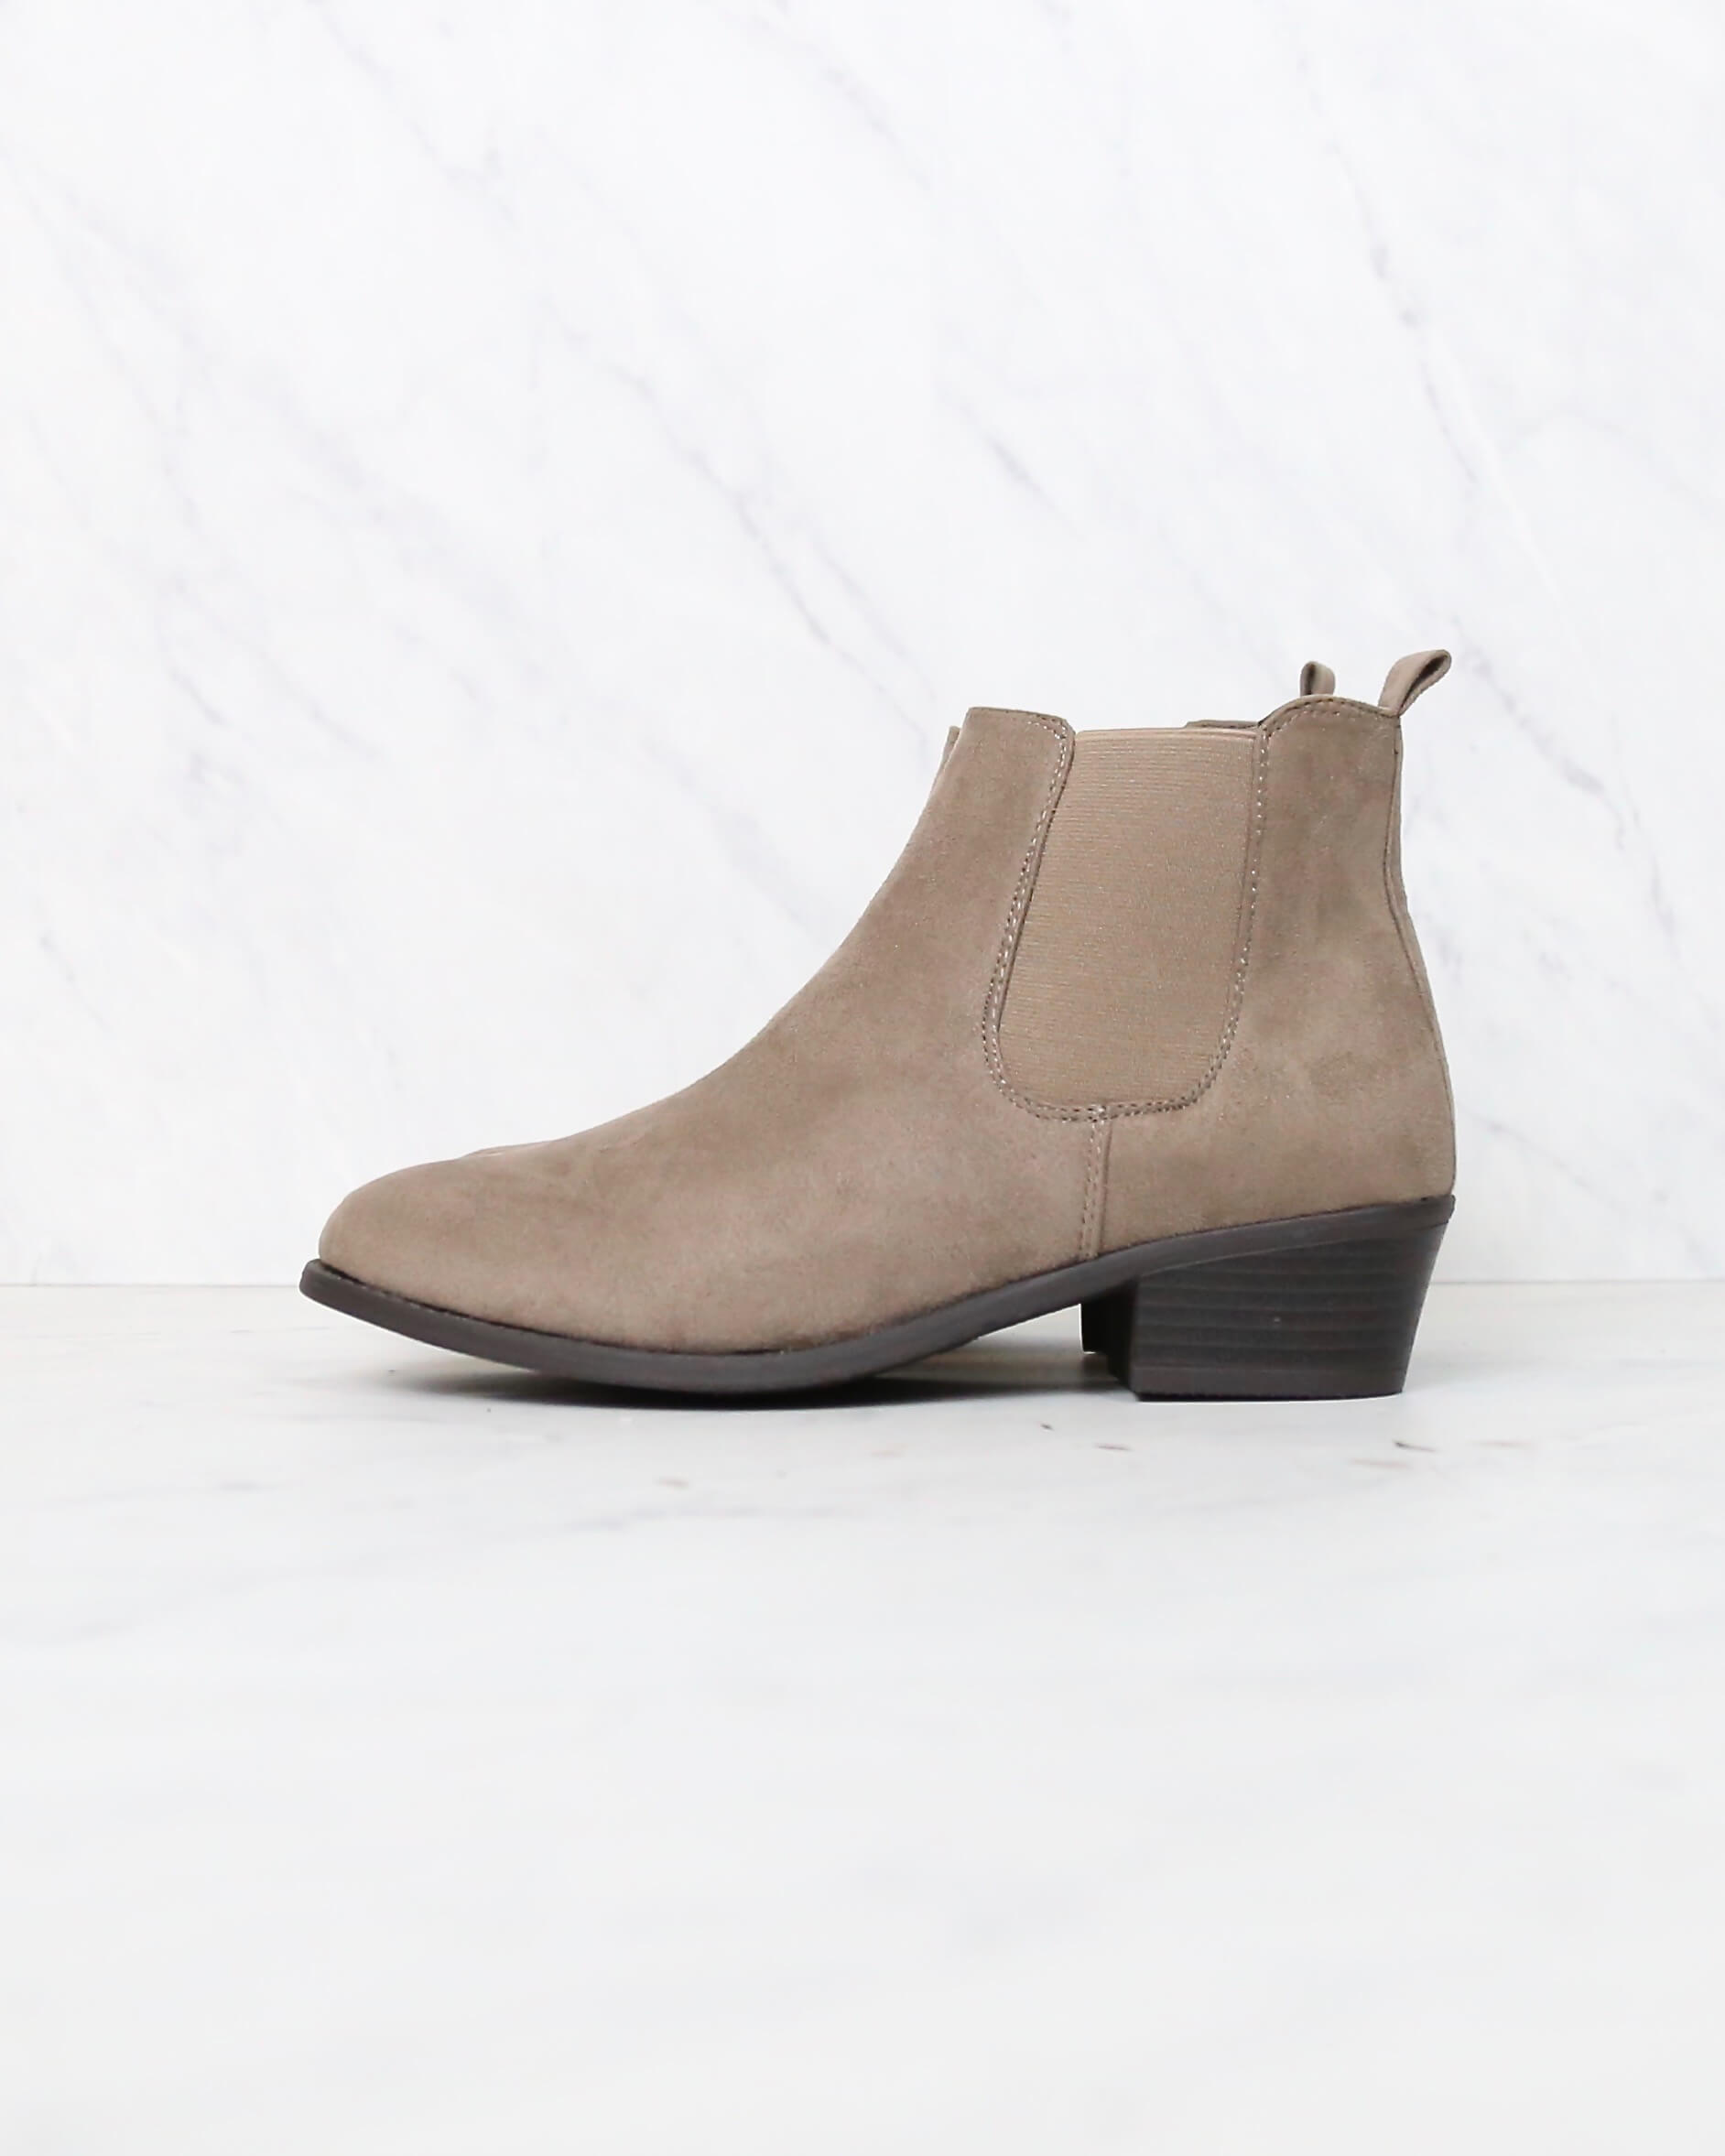 Low Heel Slip On Solid Faux Suede Ankle 